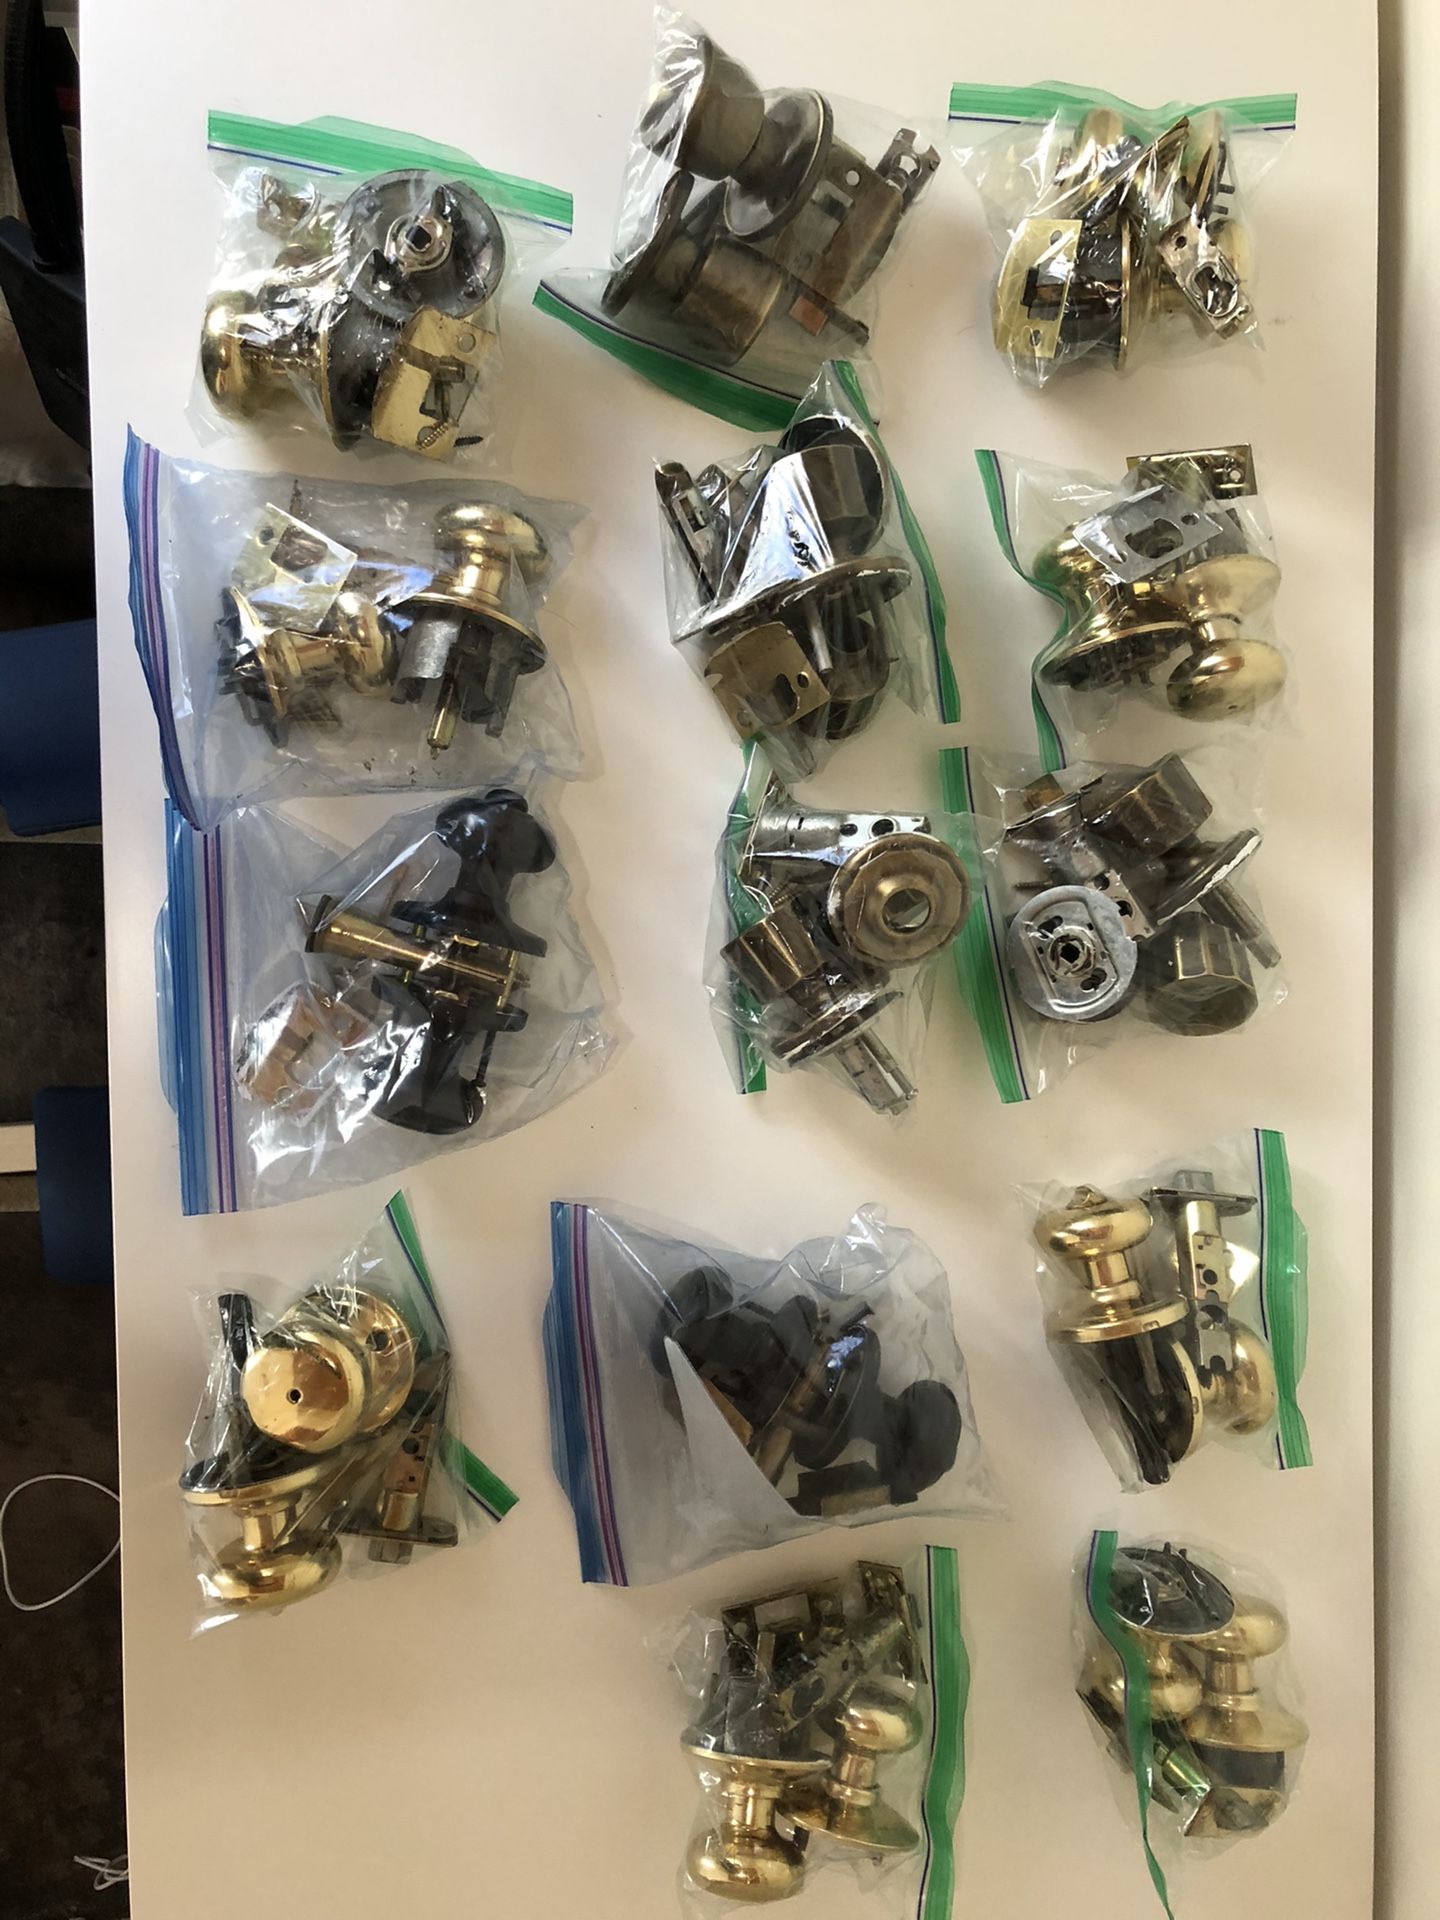 14 door knob sets with all the parts.